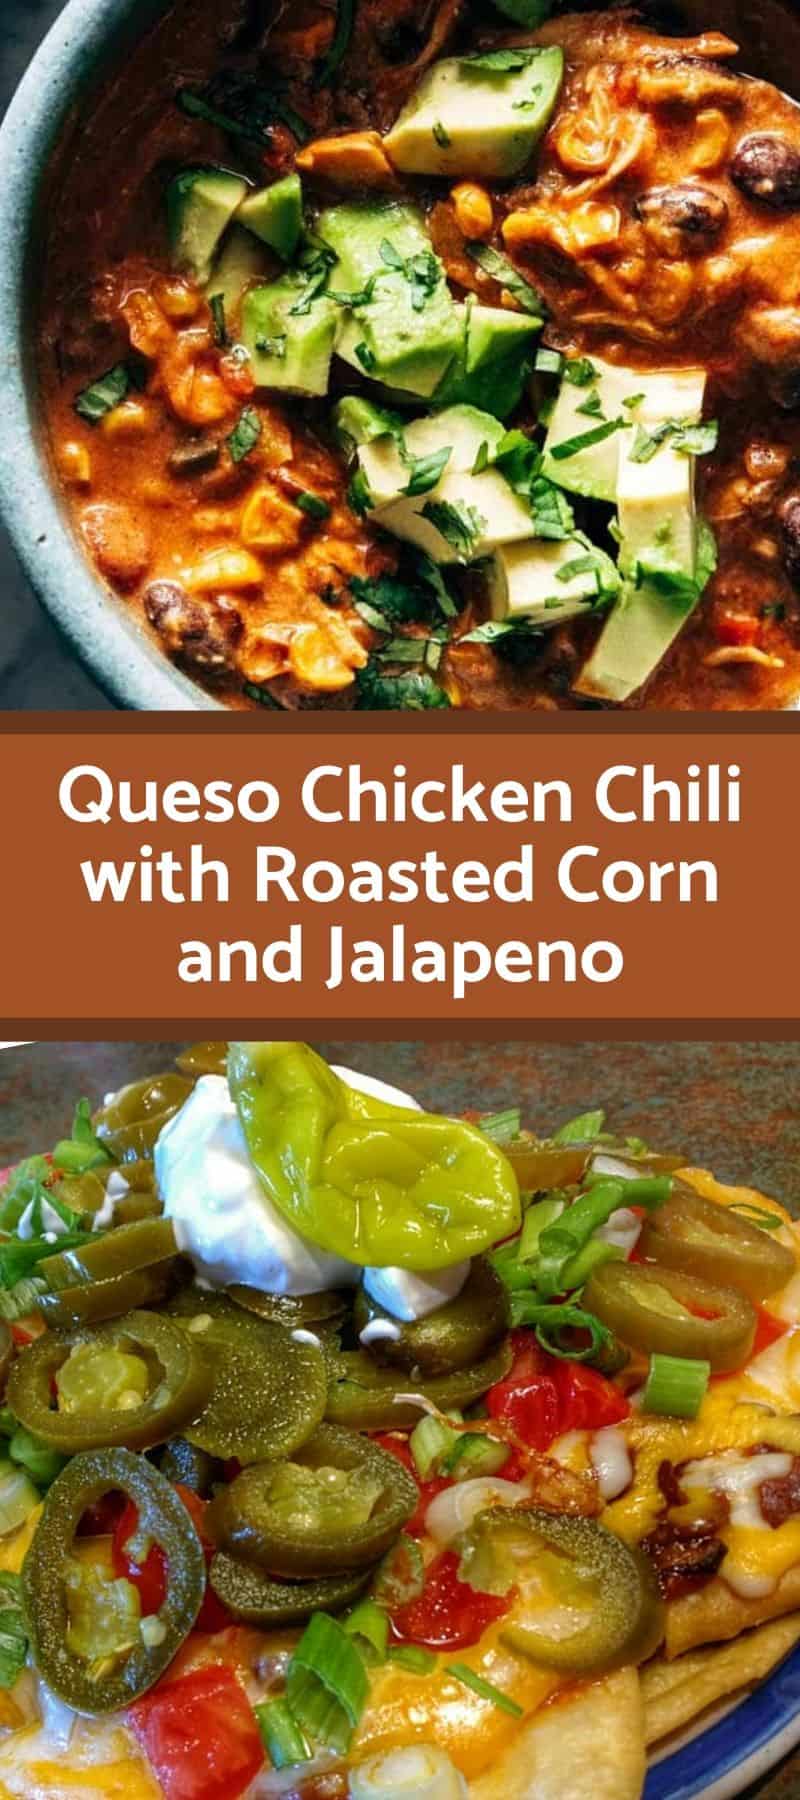 Queso Chicken Chili with Roasted Corn and Jalapeno 3